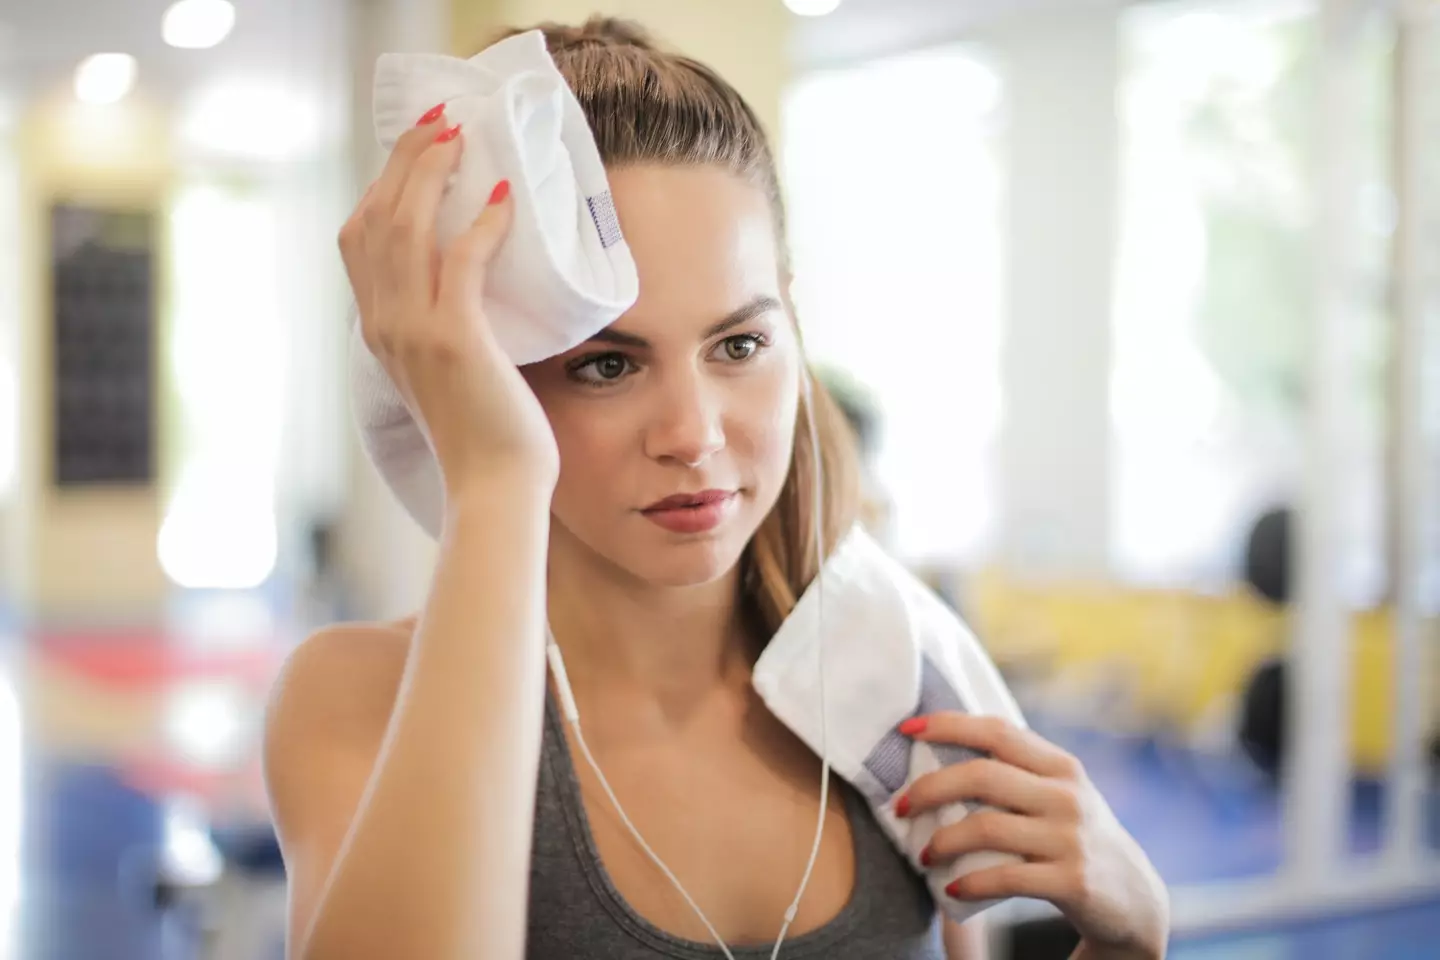 Women are battling with sweat during the heatwave.